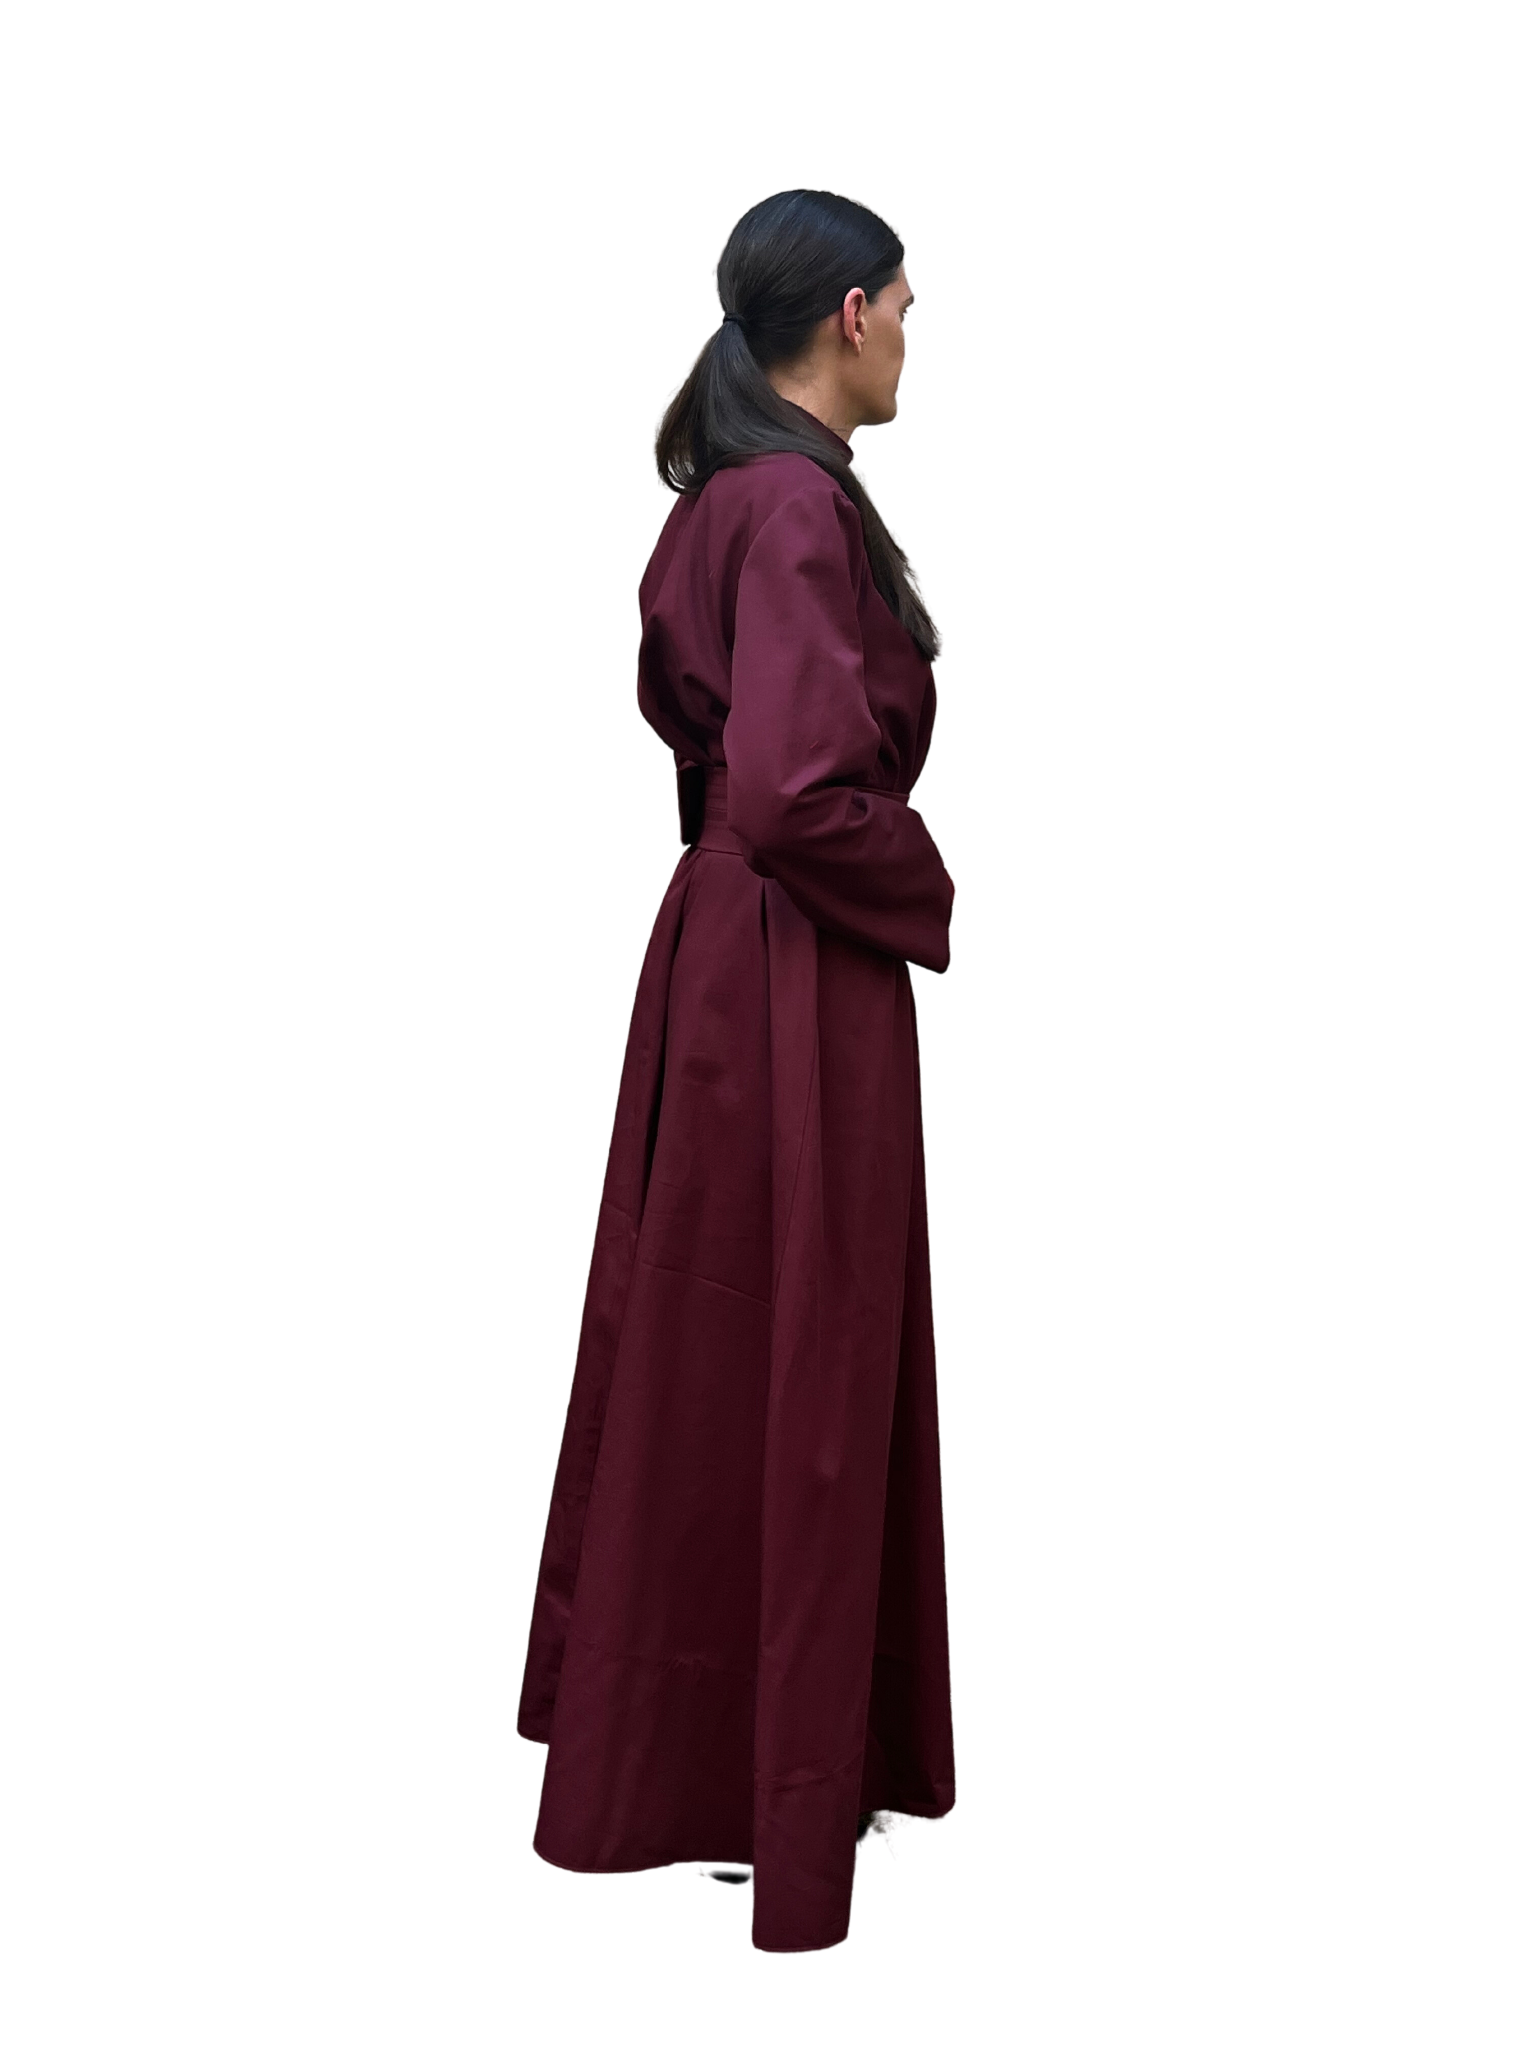 right side inner robes.png